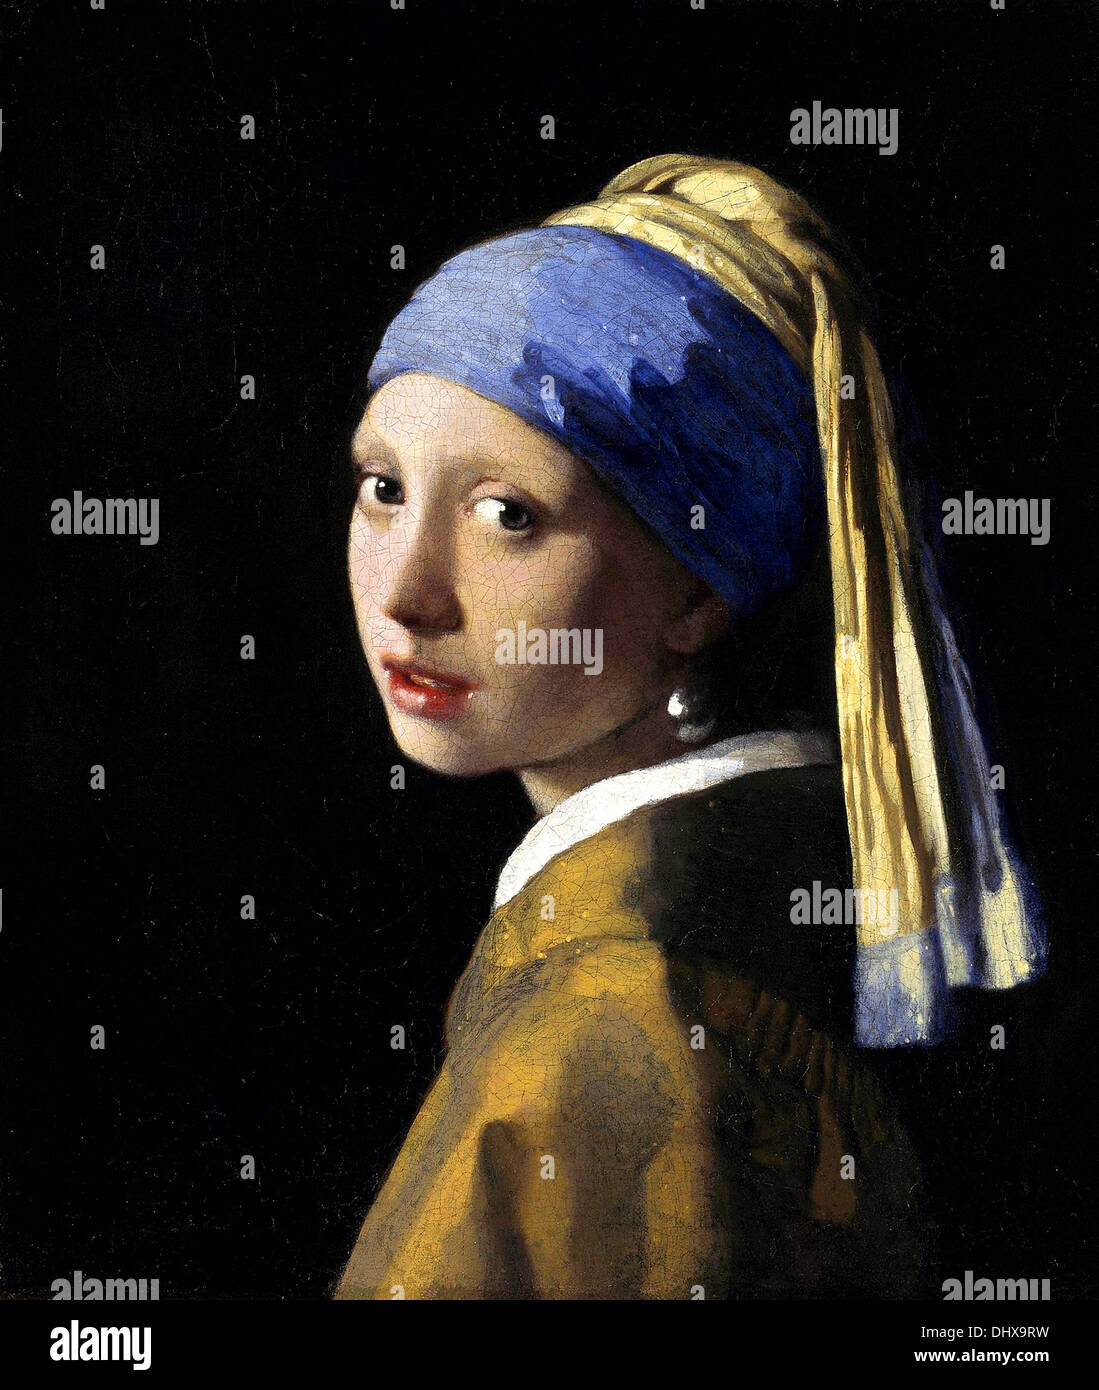 Johannes Vermeer - The Girl With The Pearl Earring, 1665 Stock Photo